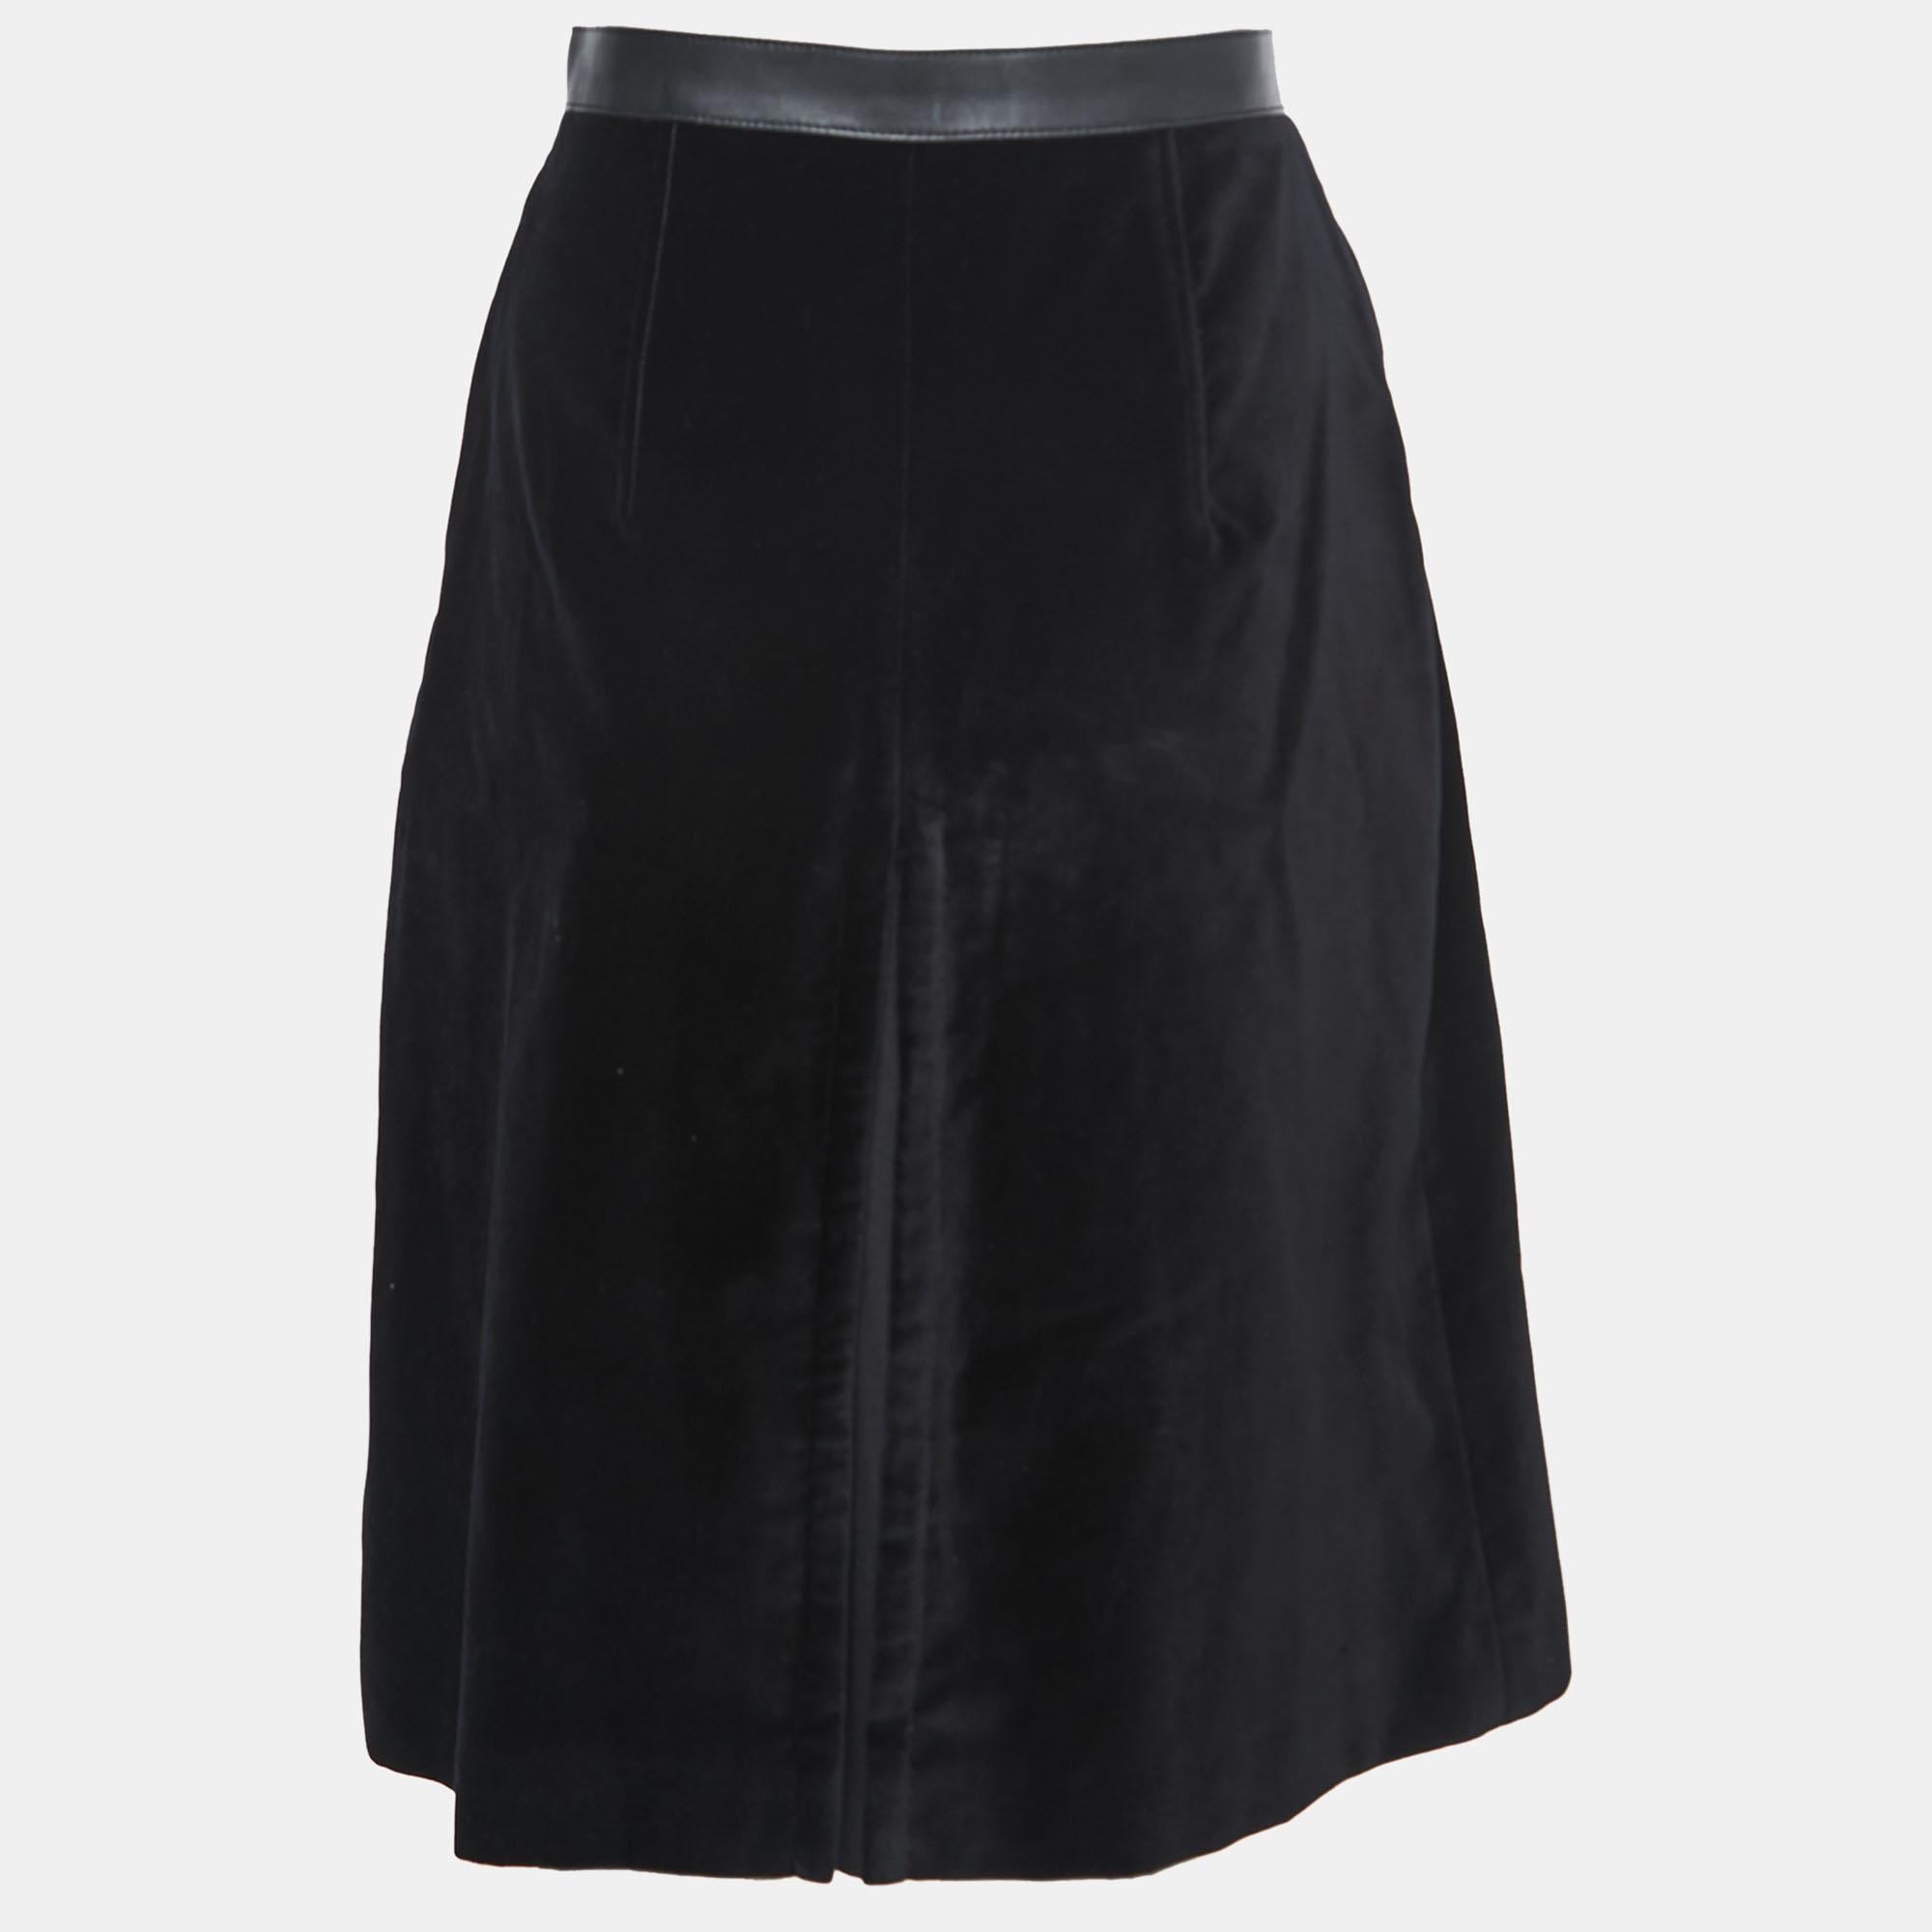 This elegant skirt is worth adding to your closet! Crafted from fine materials, it is exquisitely designed into a flattering shape.

Includes: Price Tag
